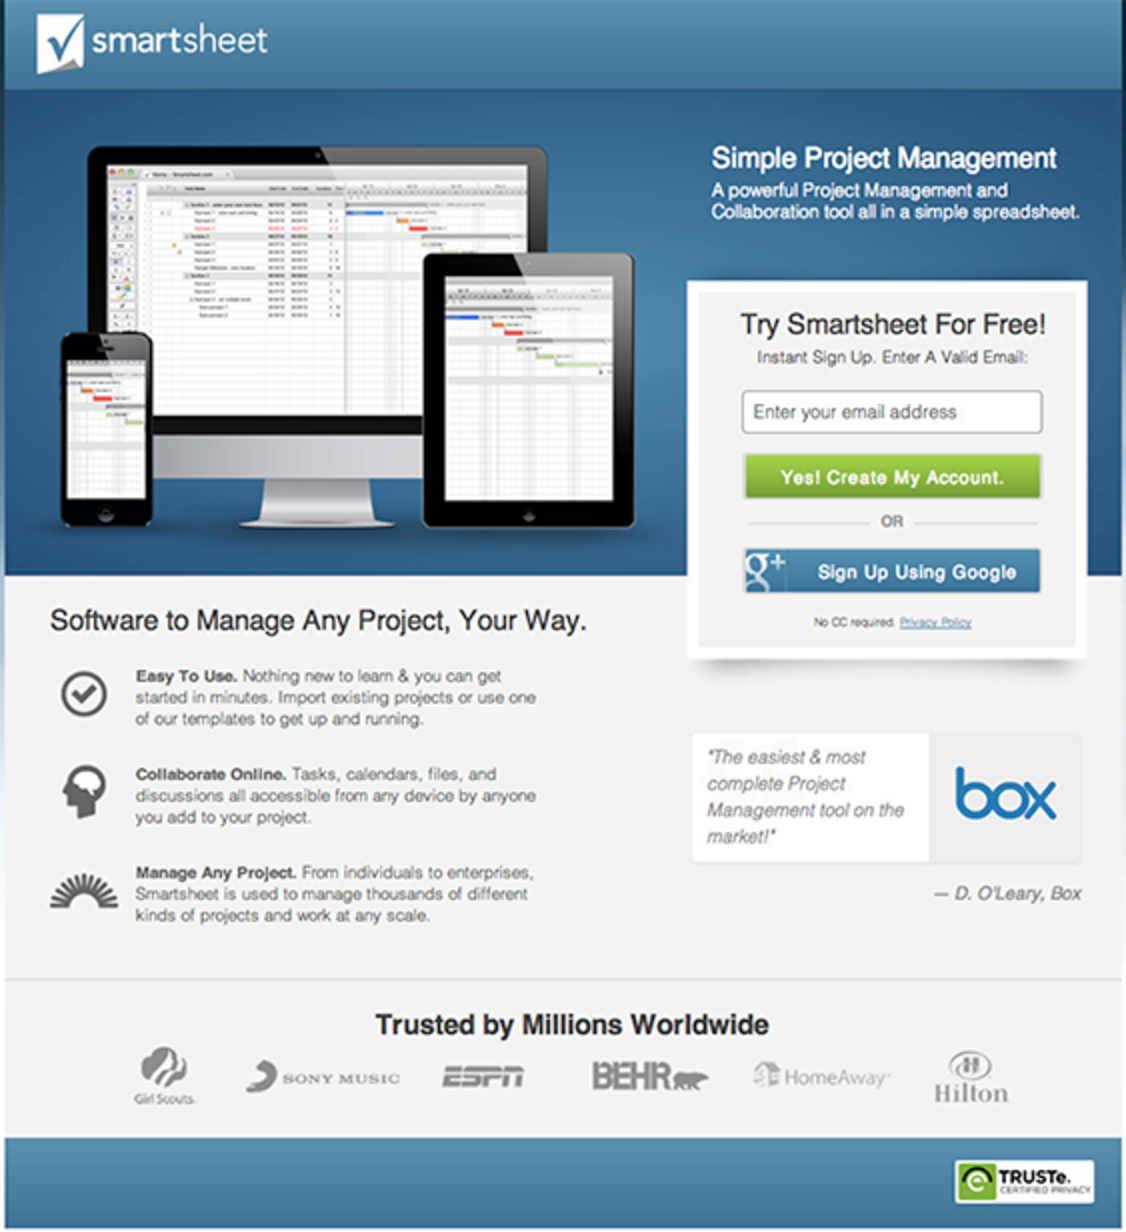 smartsheet-landing-page-clearly-structured